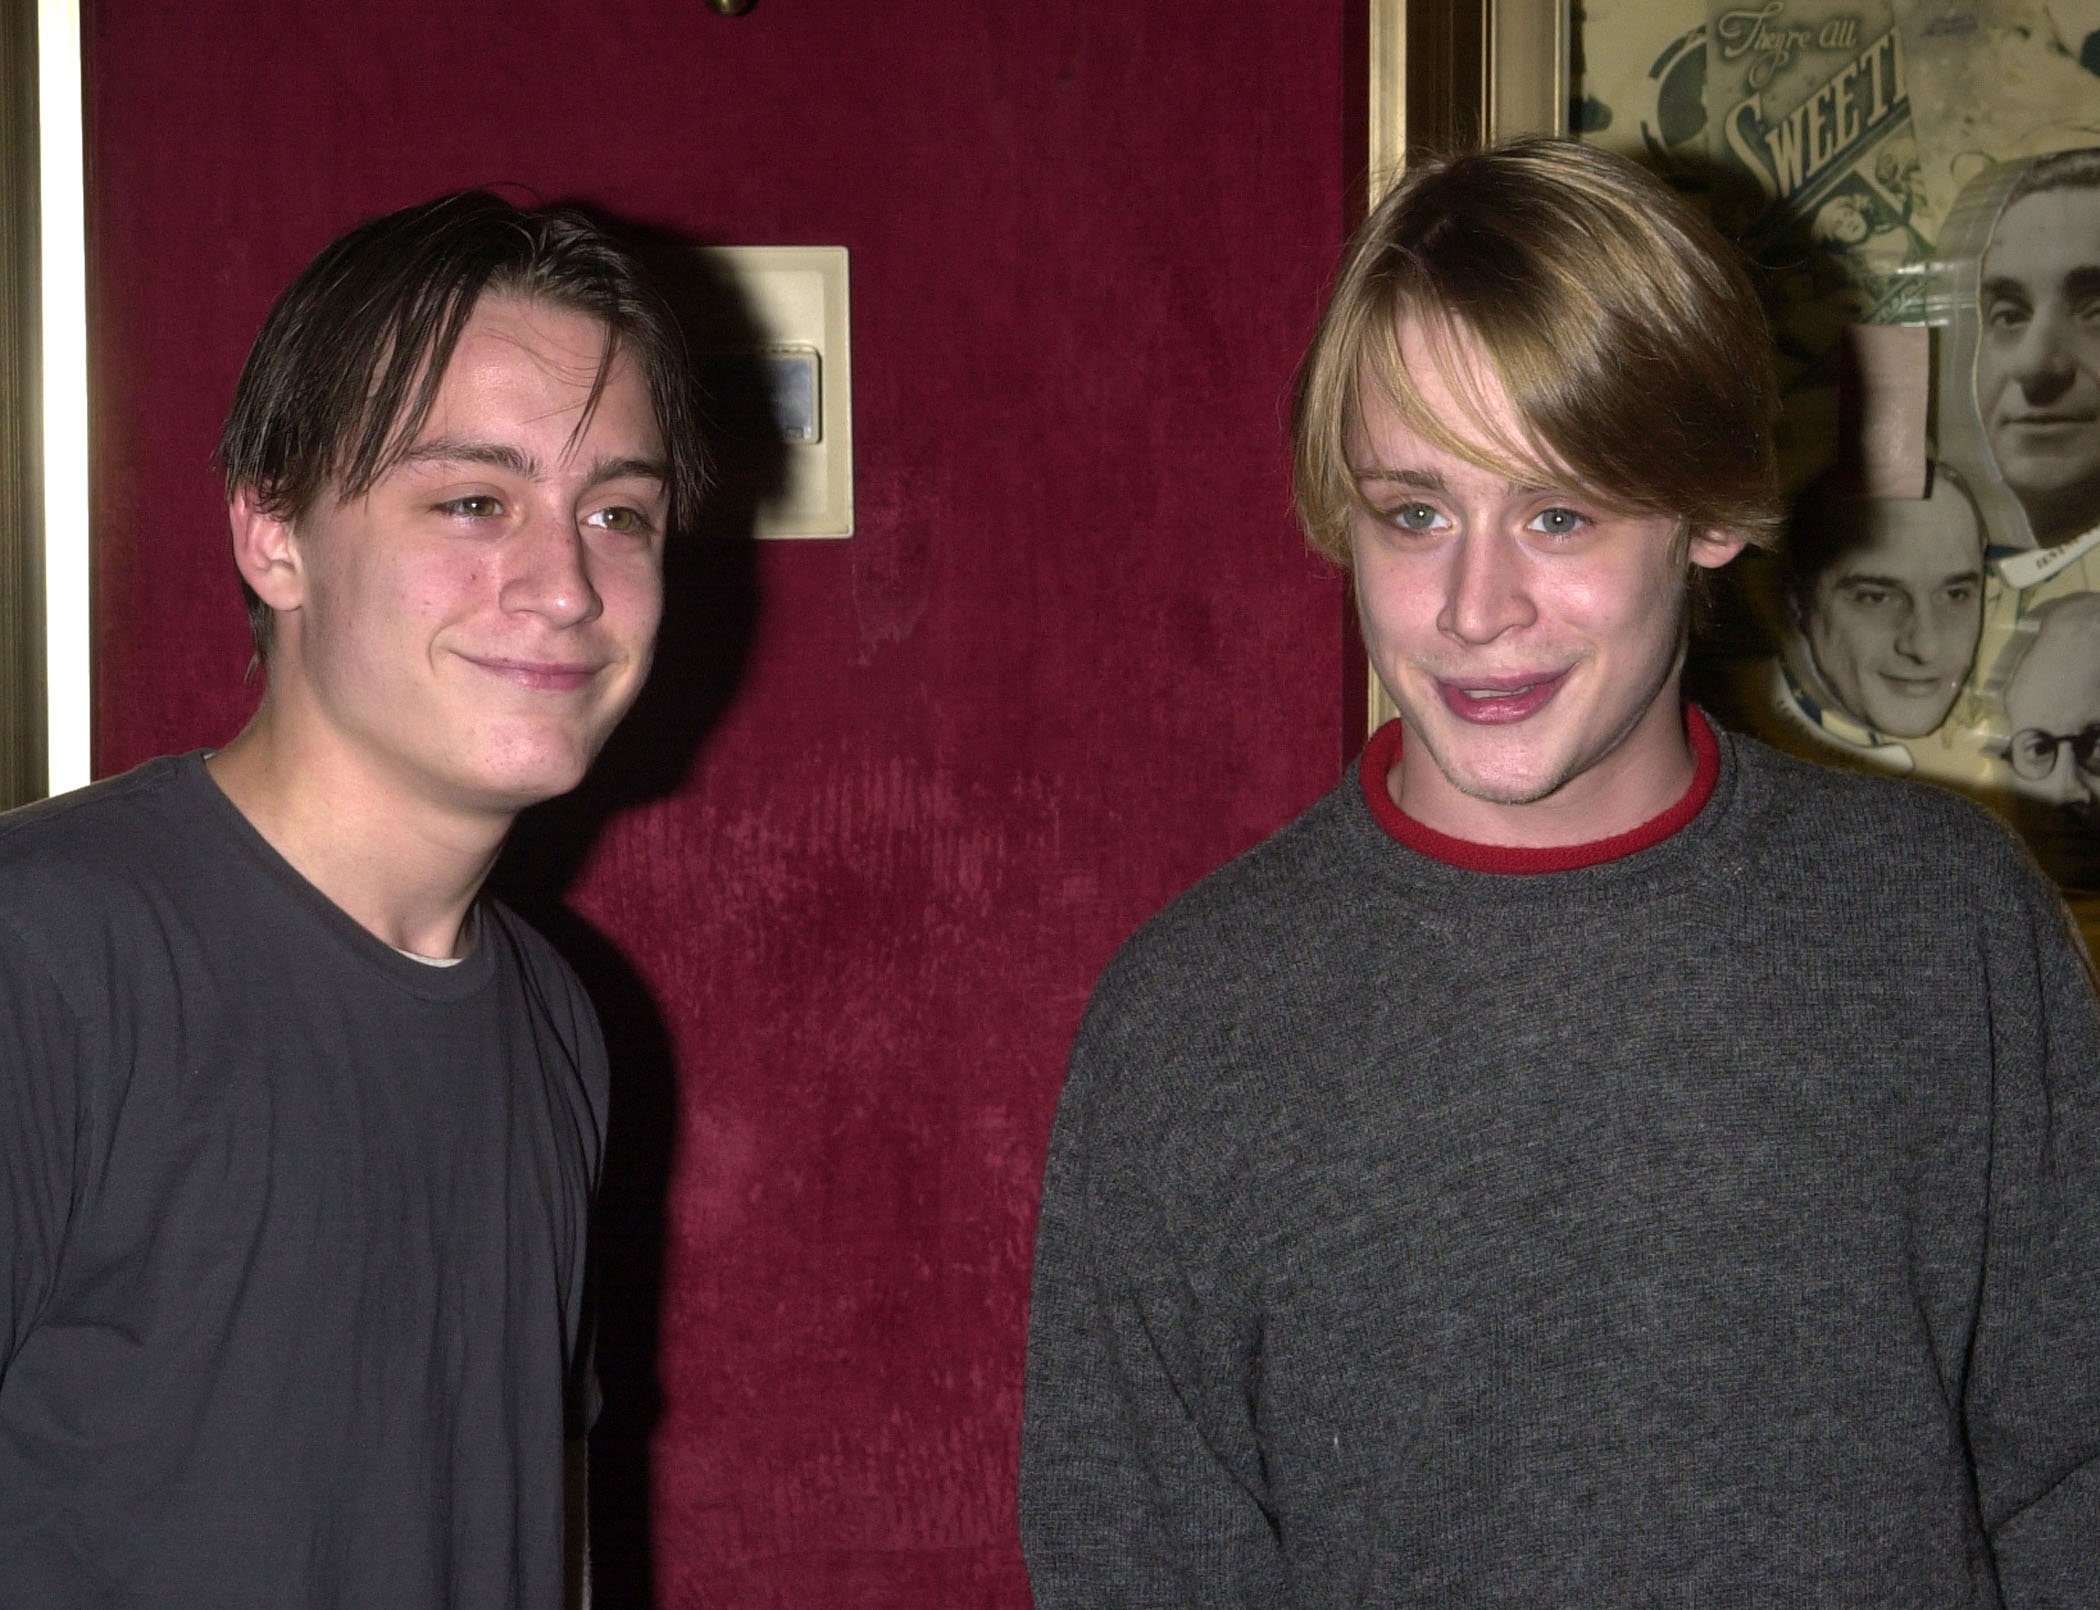 Kieran and Macaulay Culkin smiling for photographers at the 2001 'Serendipity' film premiere